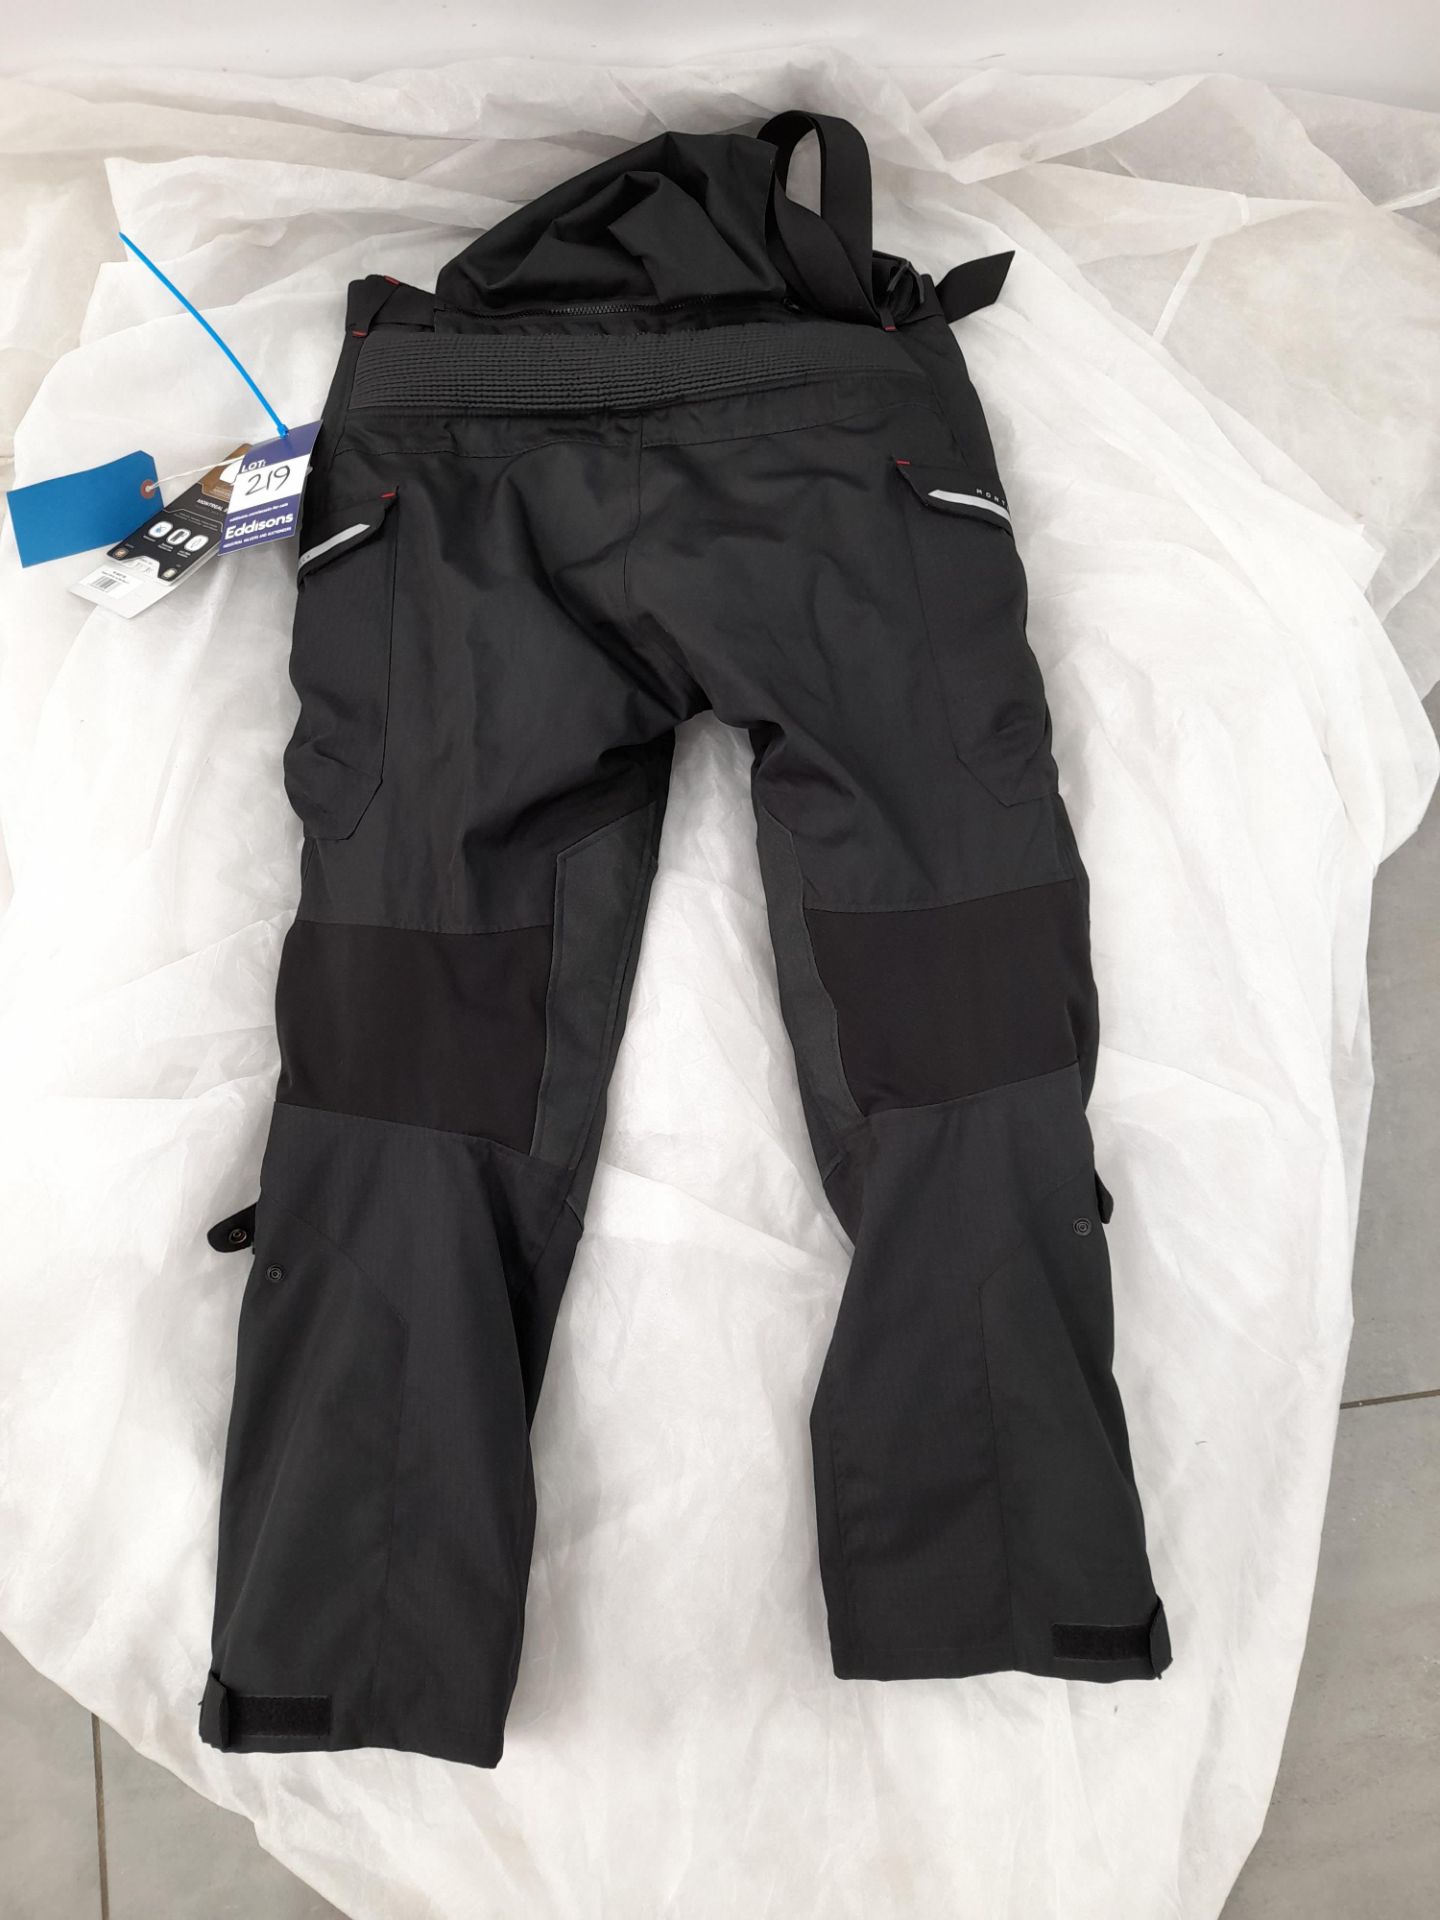 Oxford Montreal 3.0 Trousers, XL - Image 2 of 3